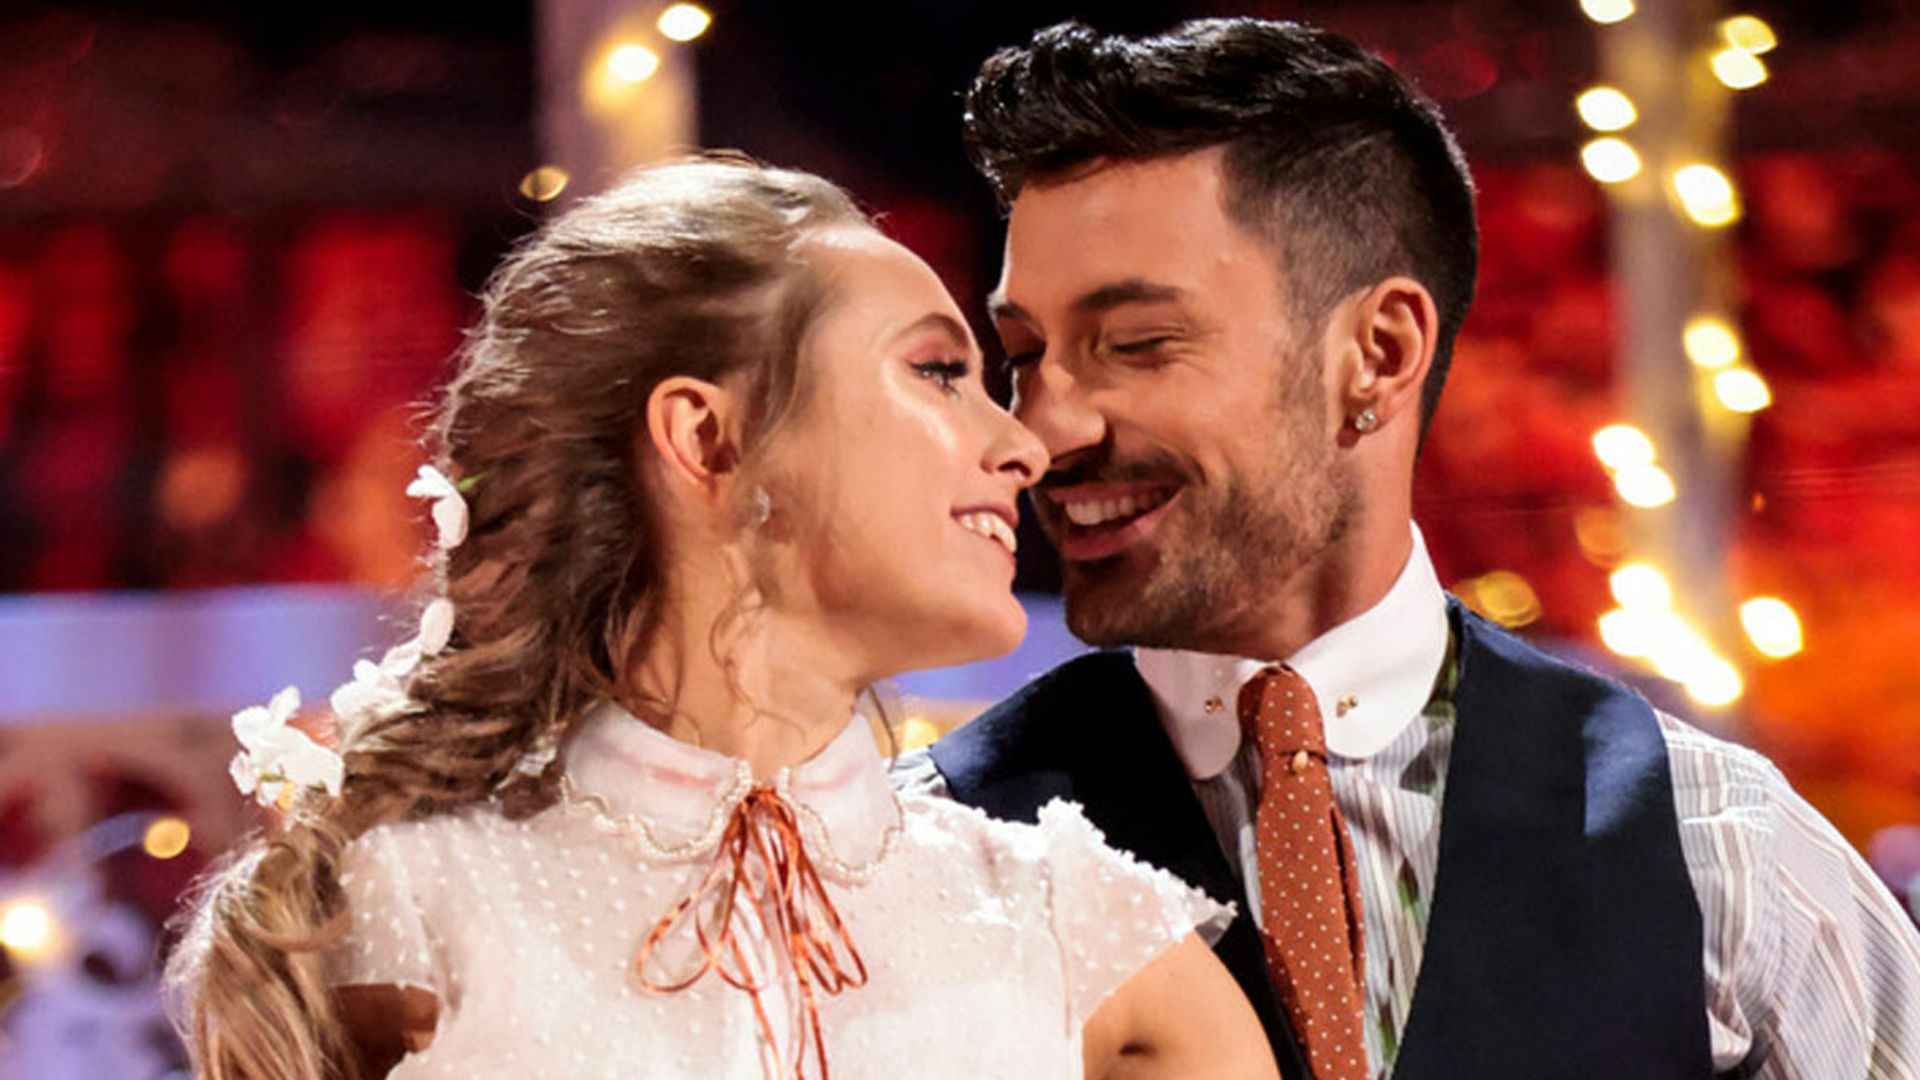 Strictly's Giovanni Pernice pokes fun at Rose Ayling-Ellis in funny clip